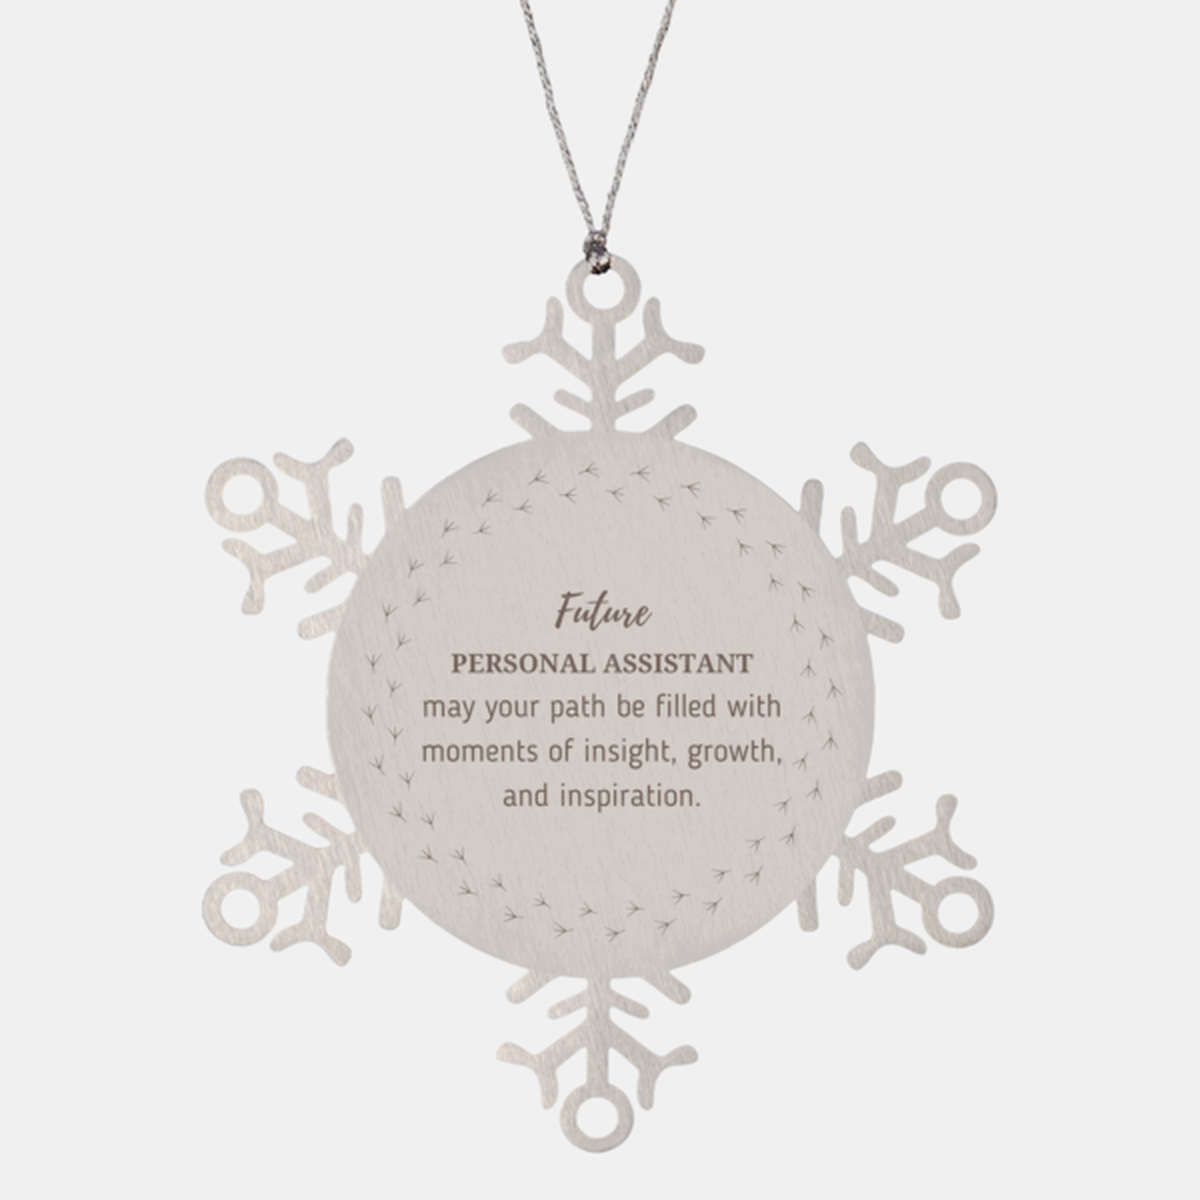 Future Personal Assistant Gifts, May your path be filled with moments of insight, Graduation Gifts for New Personal Assistant, Christmas Unique Snowflake Ornament For Men, Women, Friends